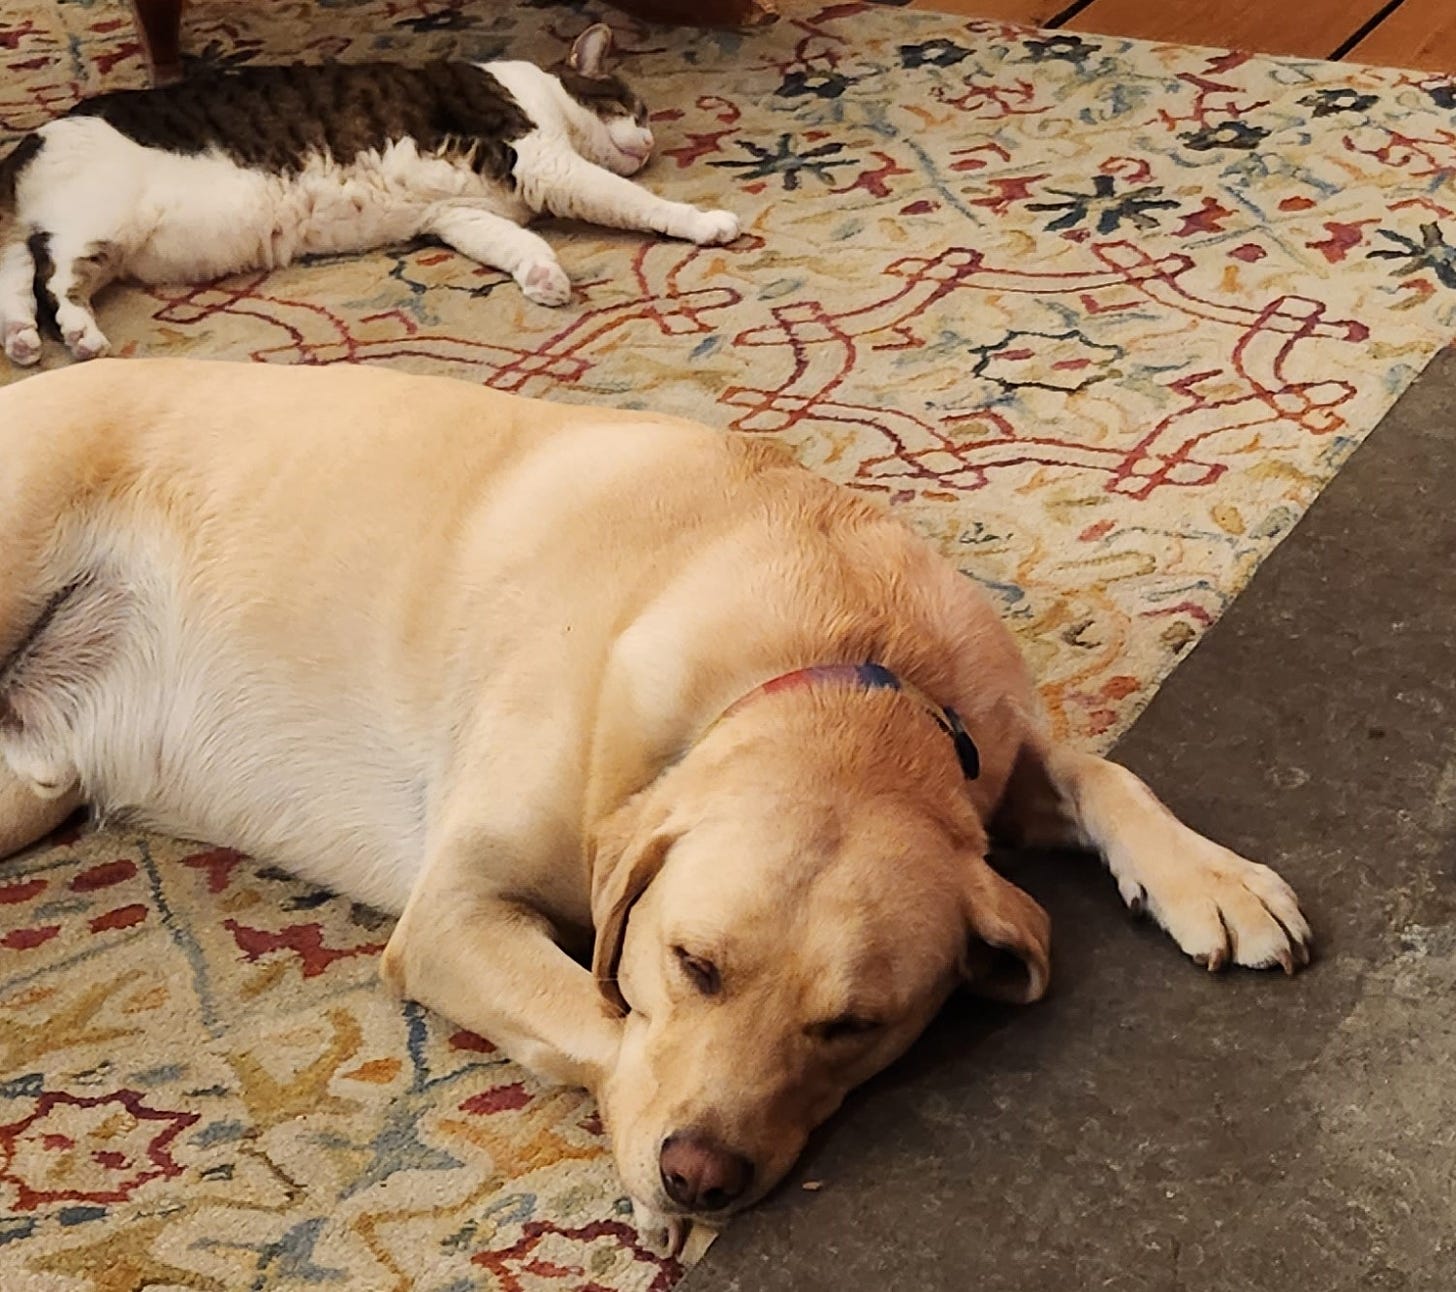 A cat and dog lay sleeping on a colorful rug